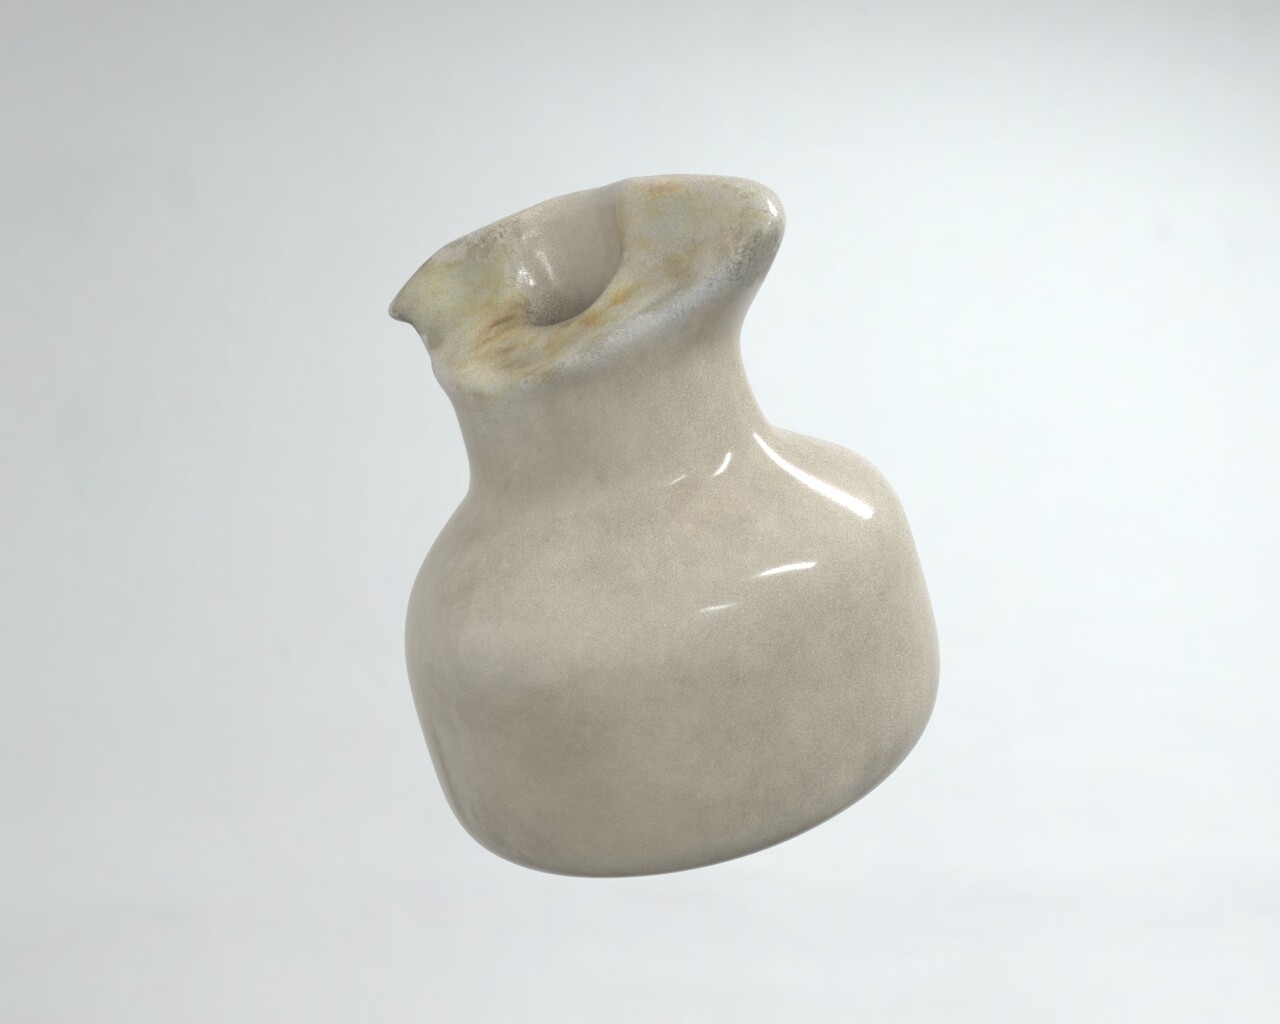 Dig Hill 80: Object 1208, Candle Holder